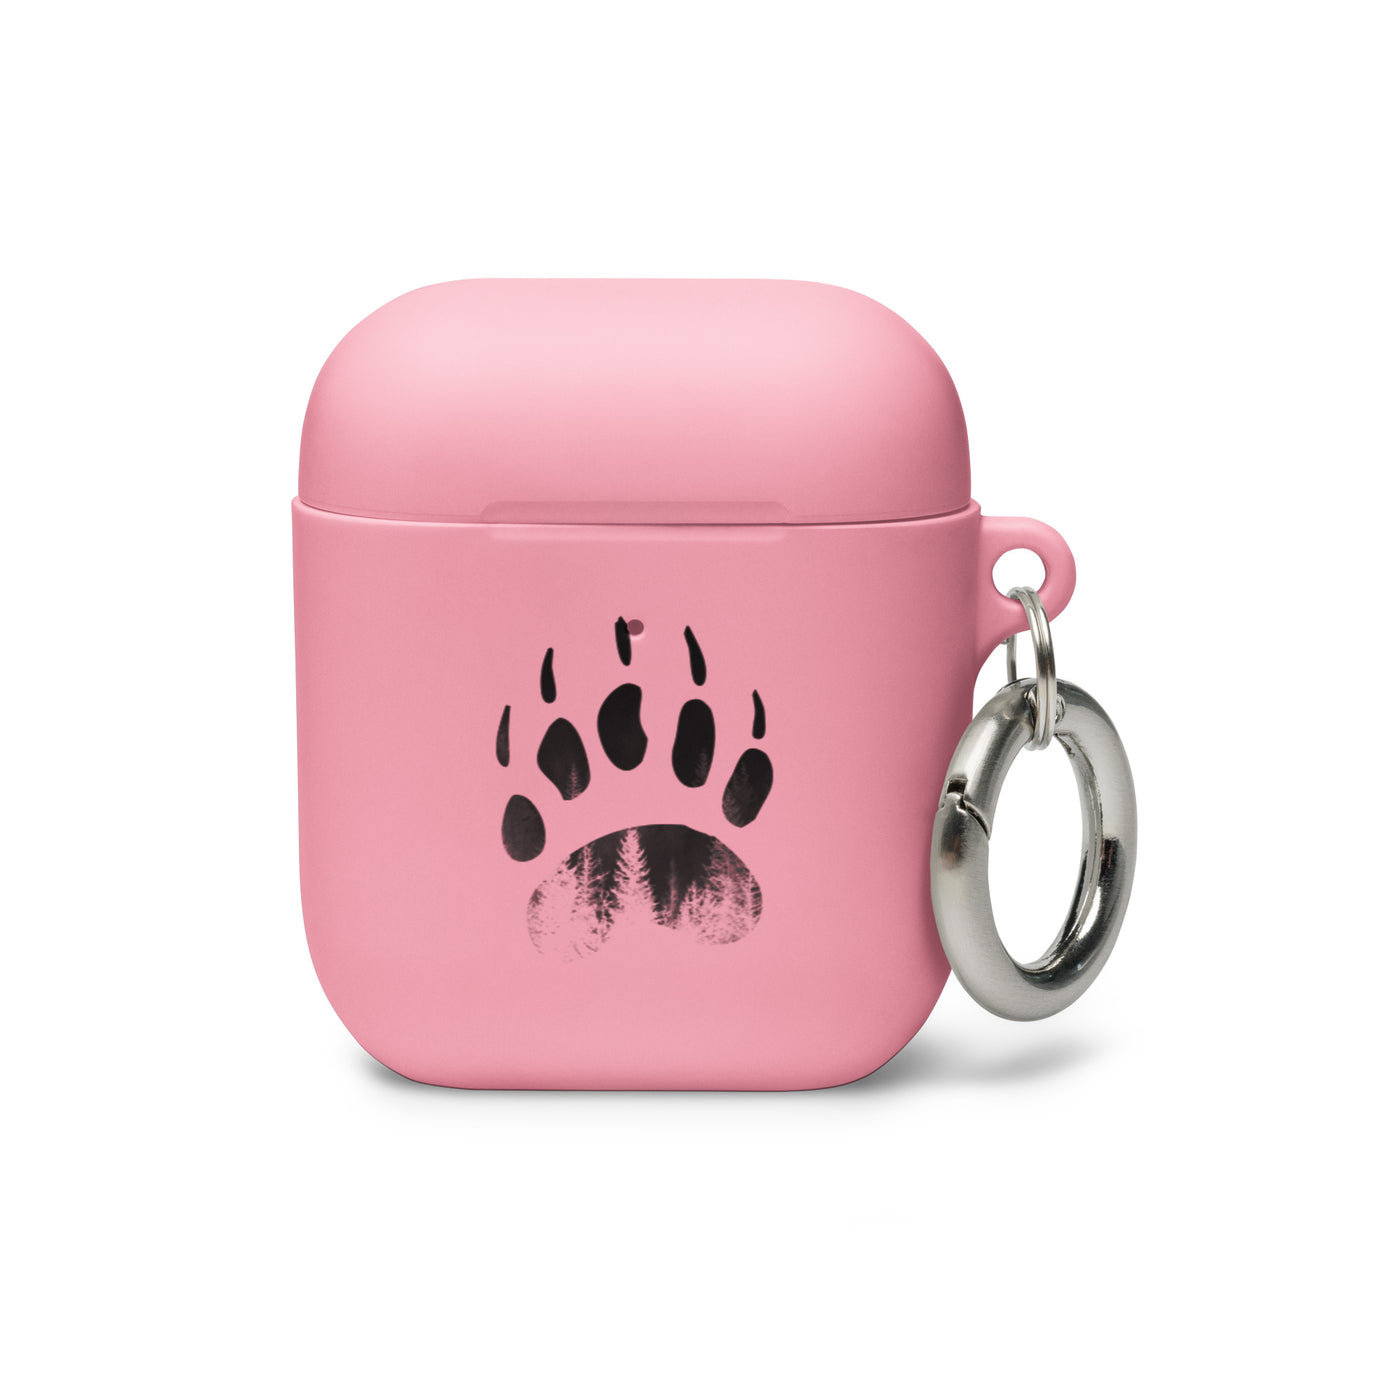 Bär - AirPods Case camping Pink AirPods